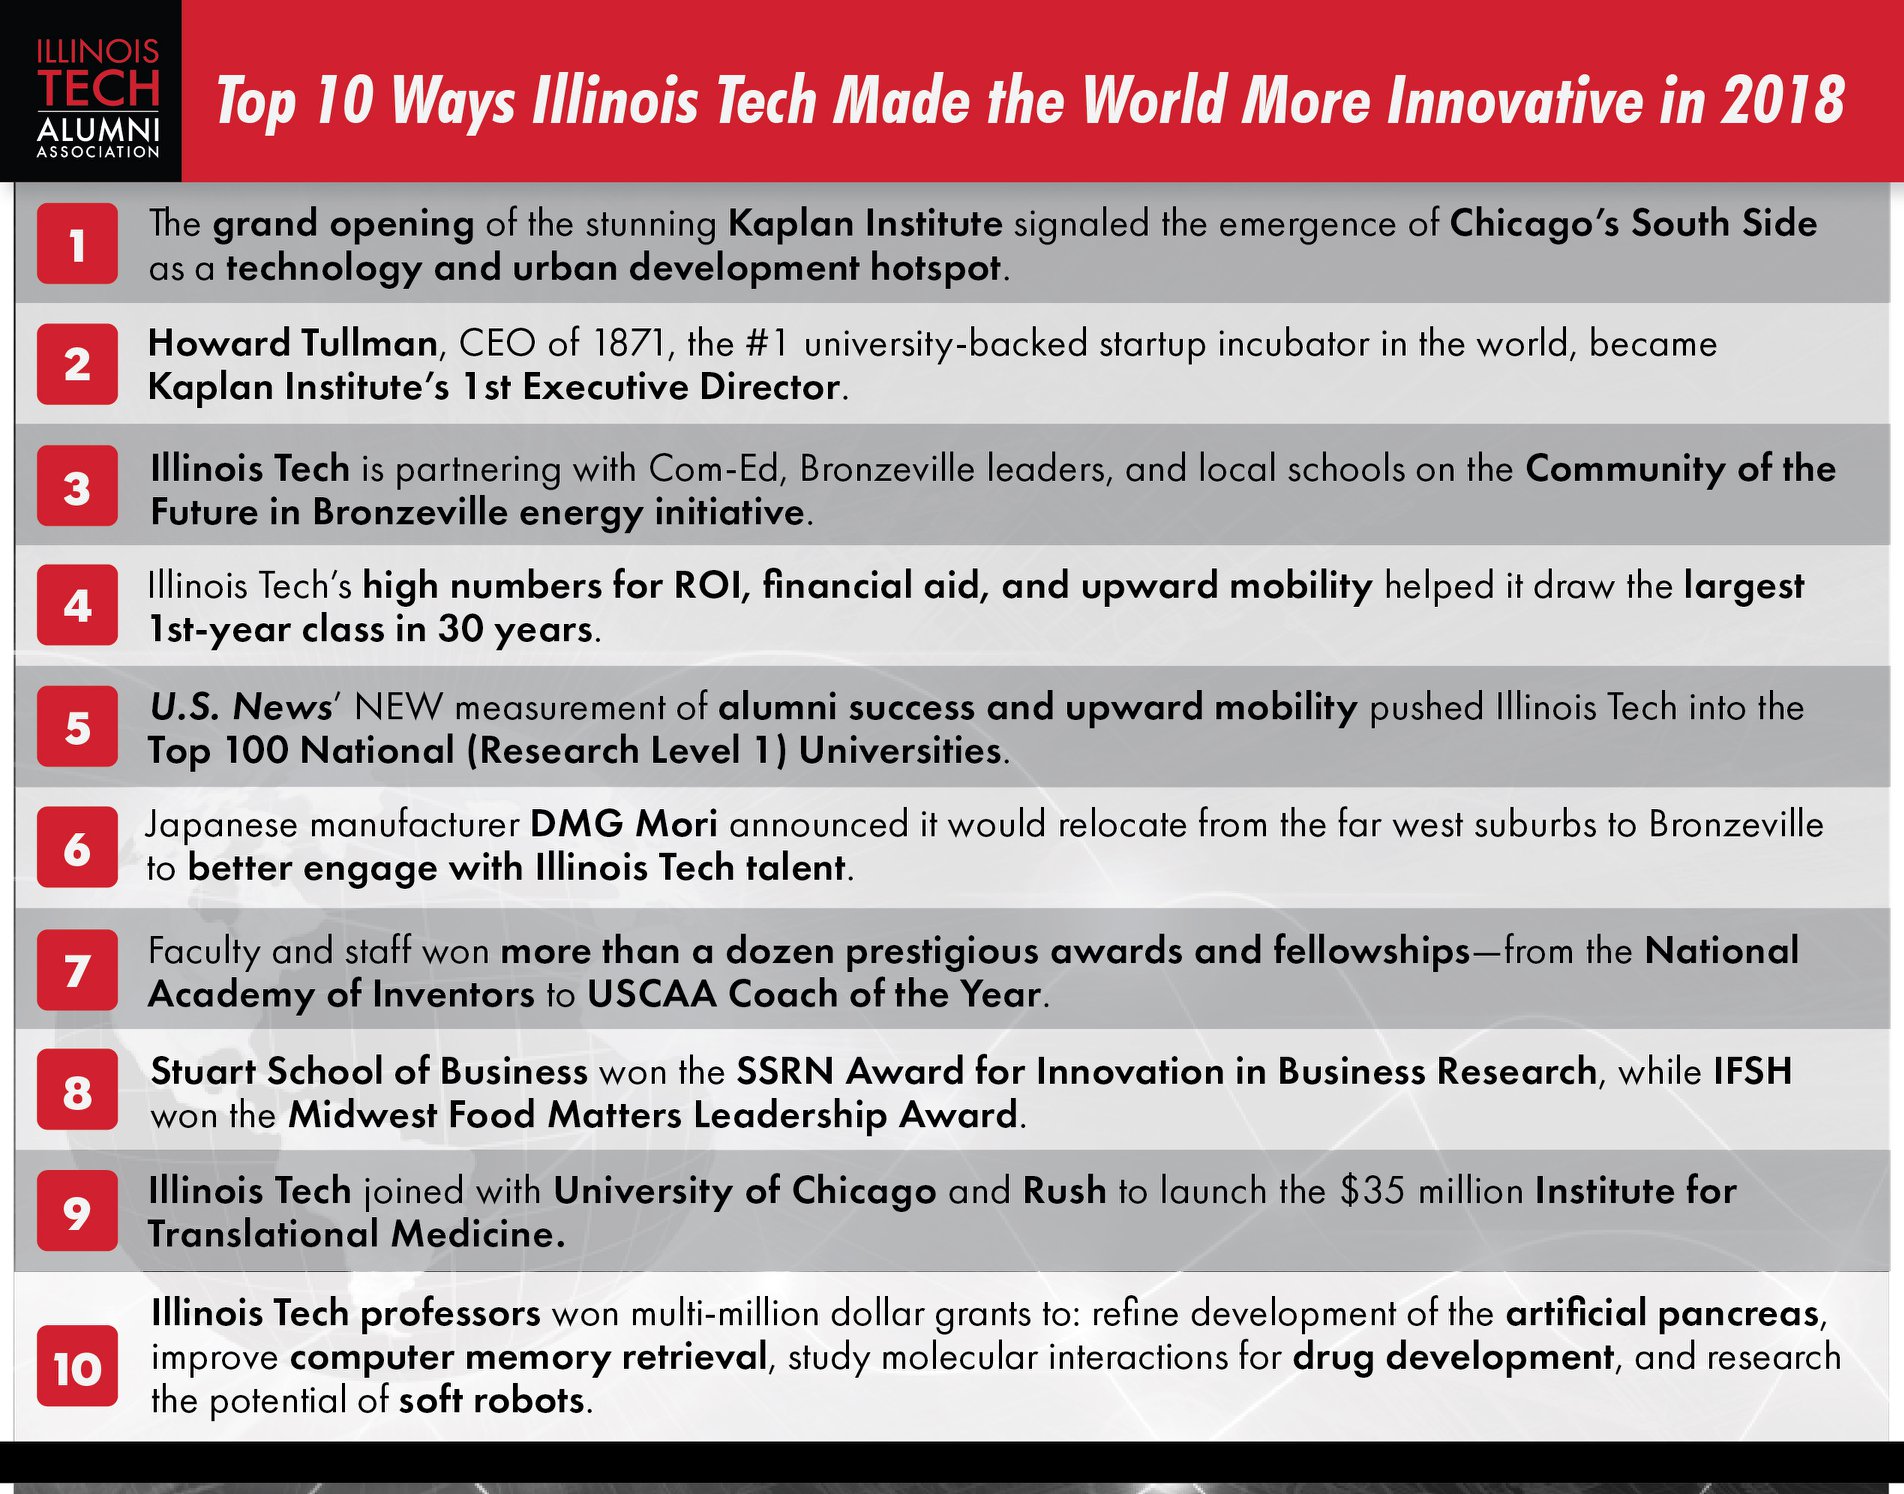 Graphic listing of 10 ways Illinois Institute of Technology made the world more innovative in 2018.